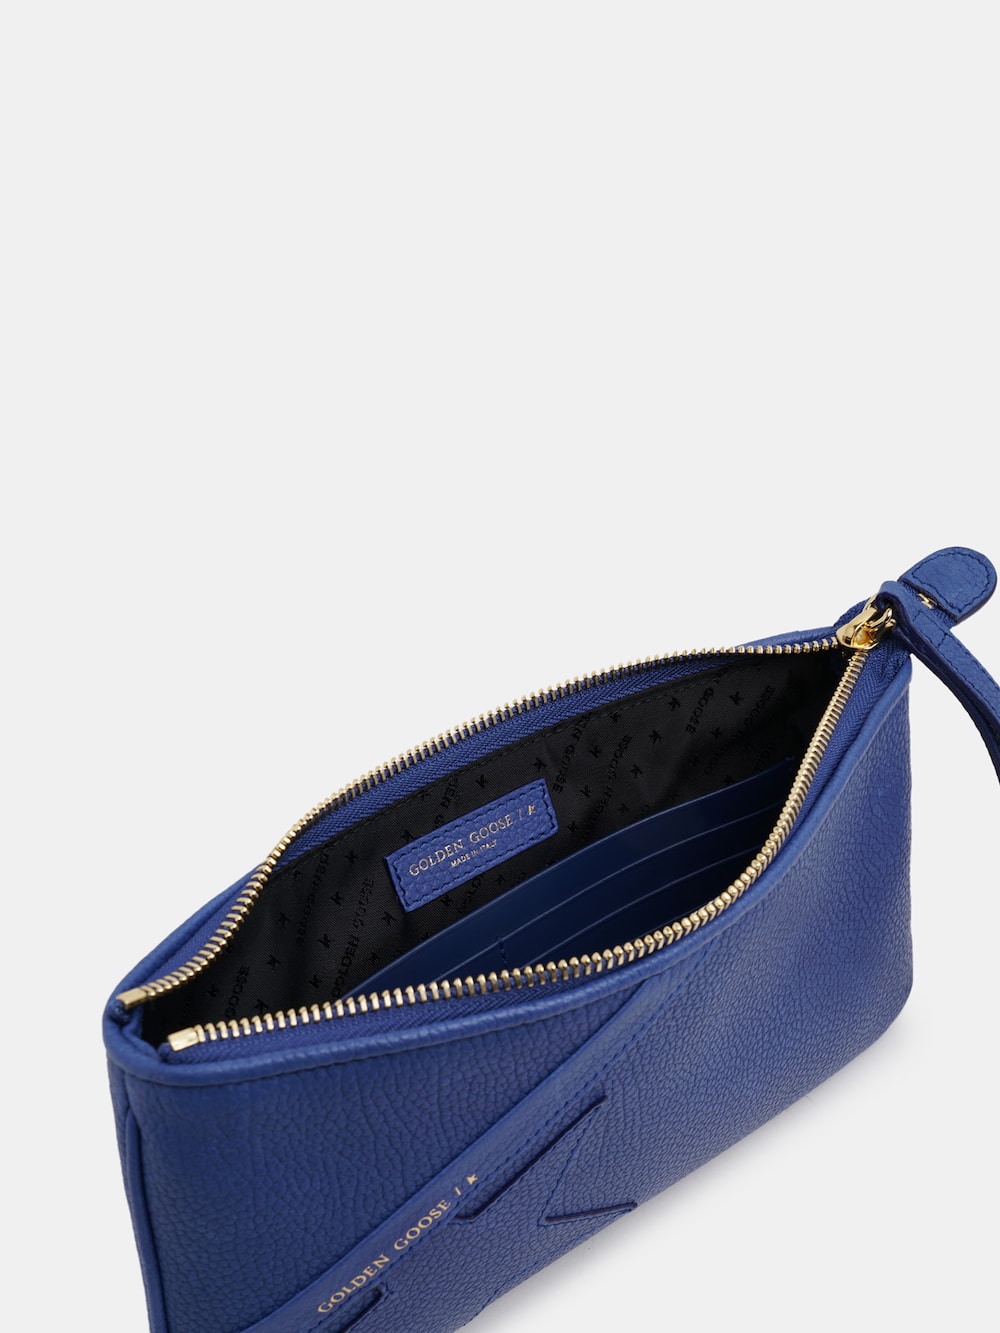 Golden Goose - Blue Star Wrist clutch bag in grained leather in 